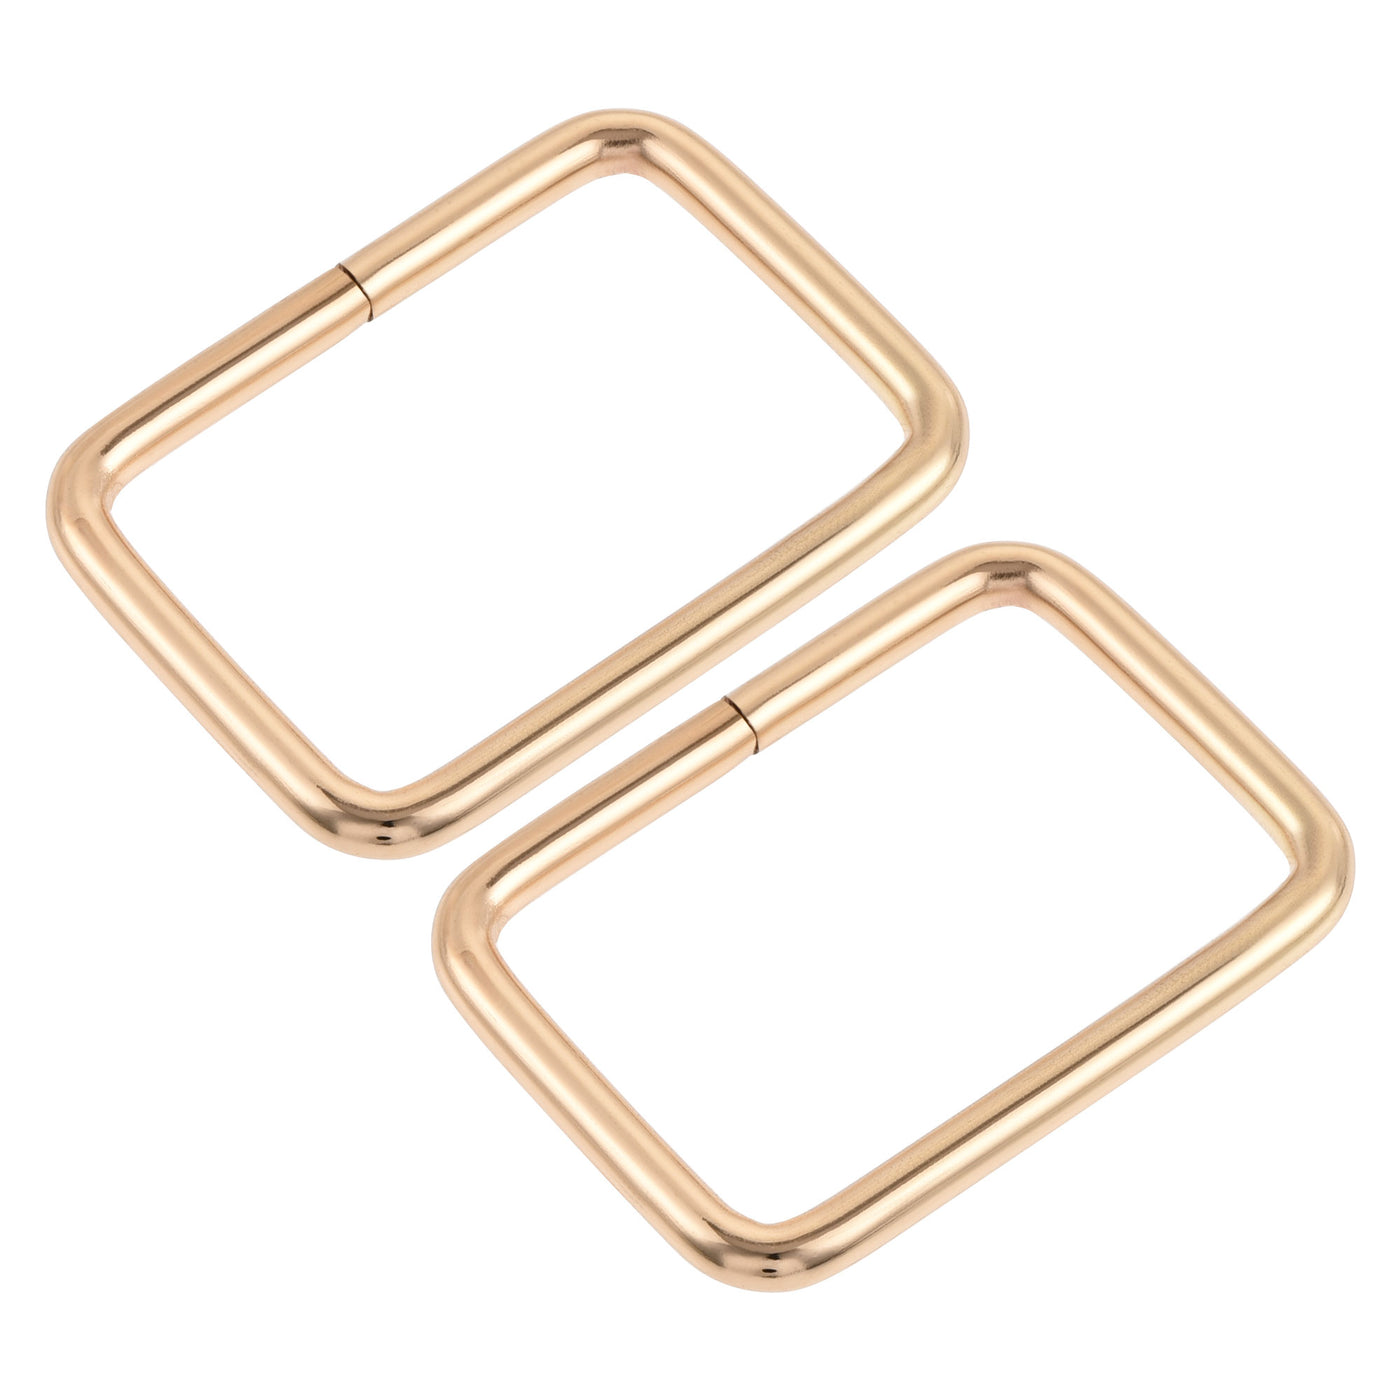 uxcell Uxcell Metal Rectangle Ring Buckles 38.8x25mm for Bags Belts DIY Gold Tone 20pcs